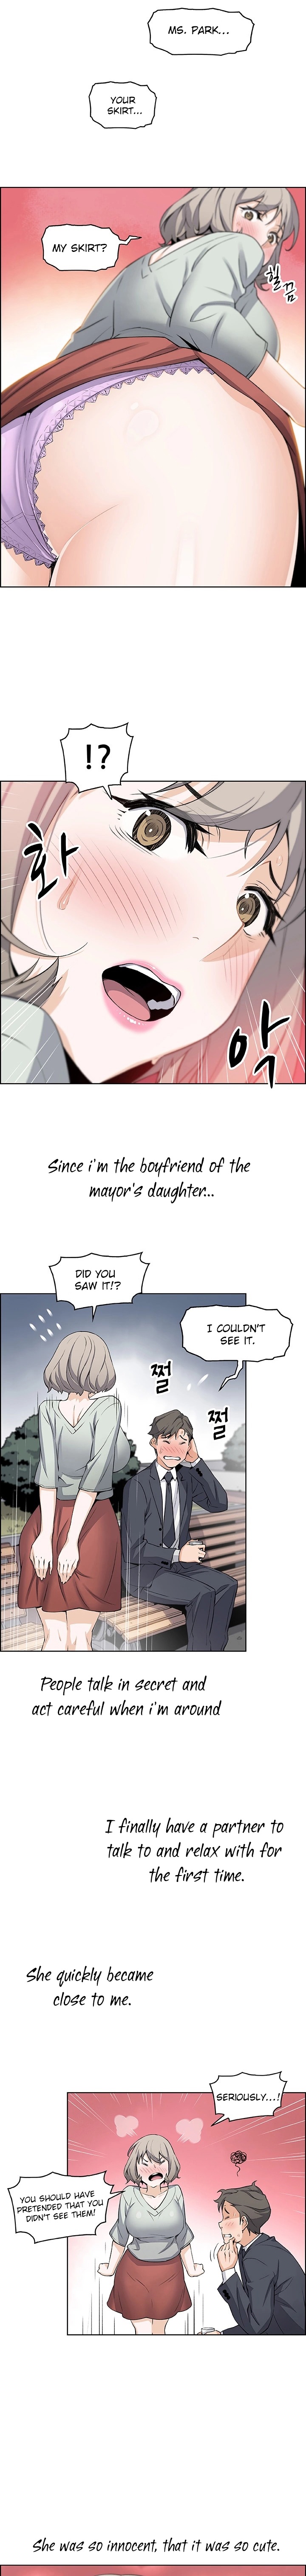 Housekeeper Manhwa - Chapter 15 Page 11